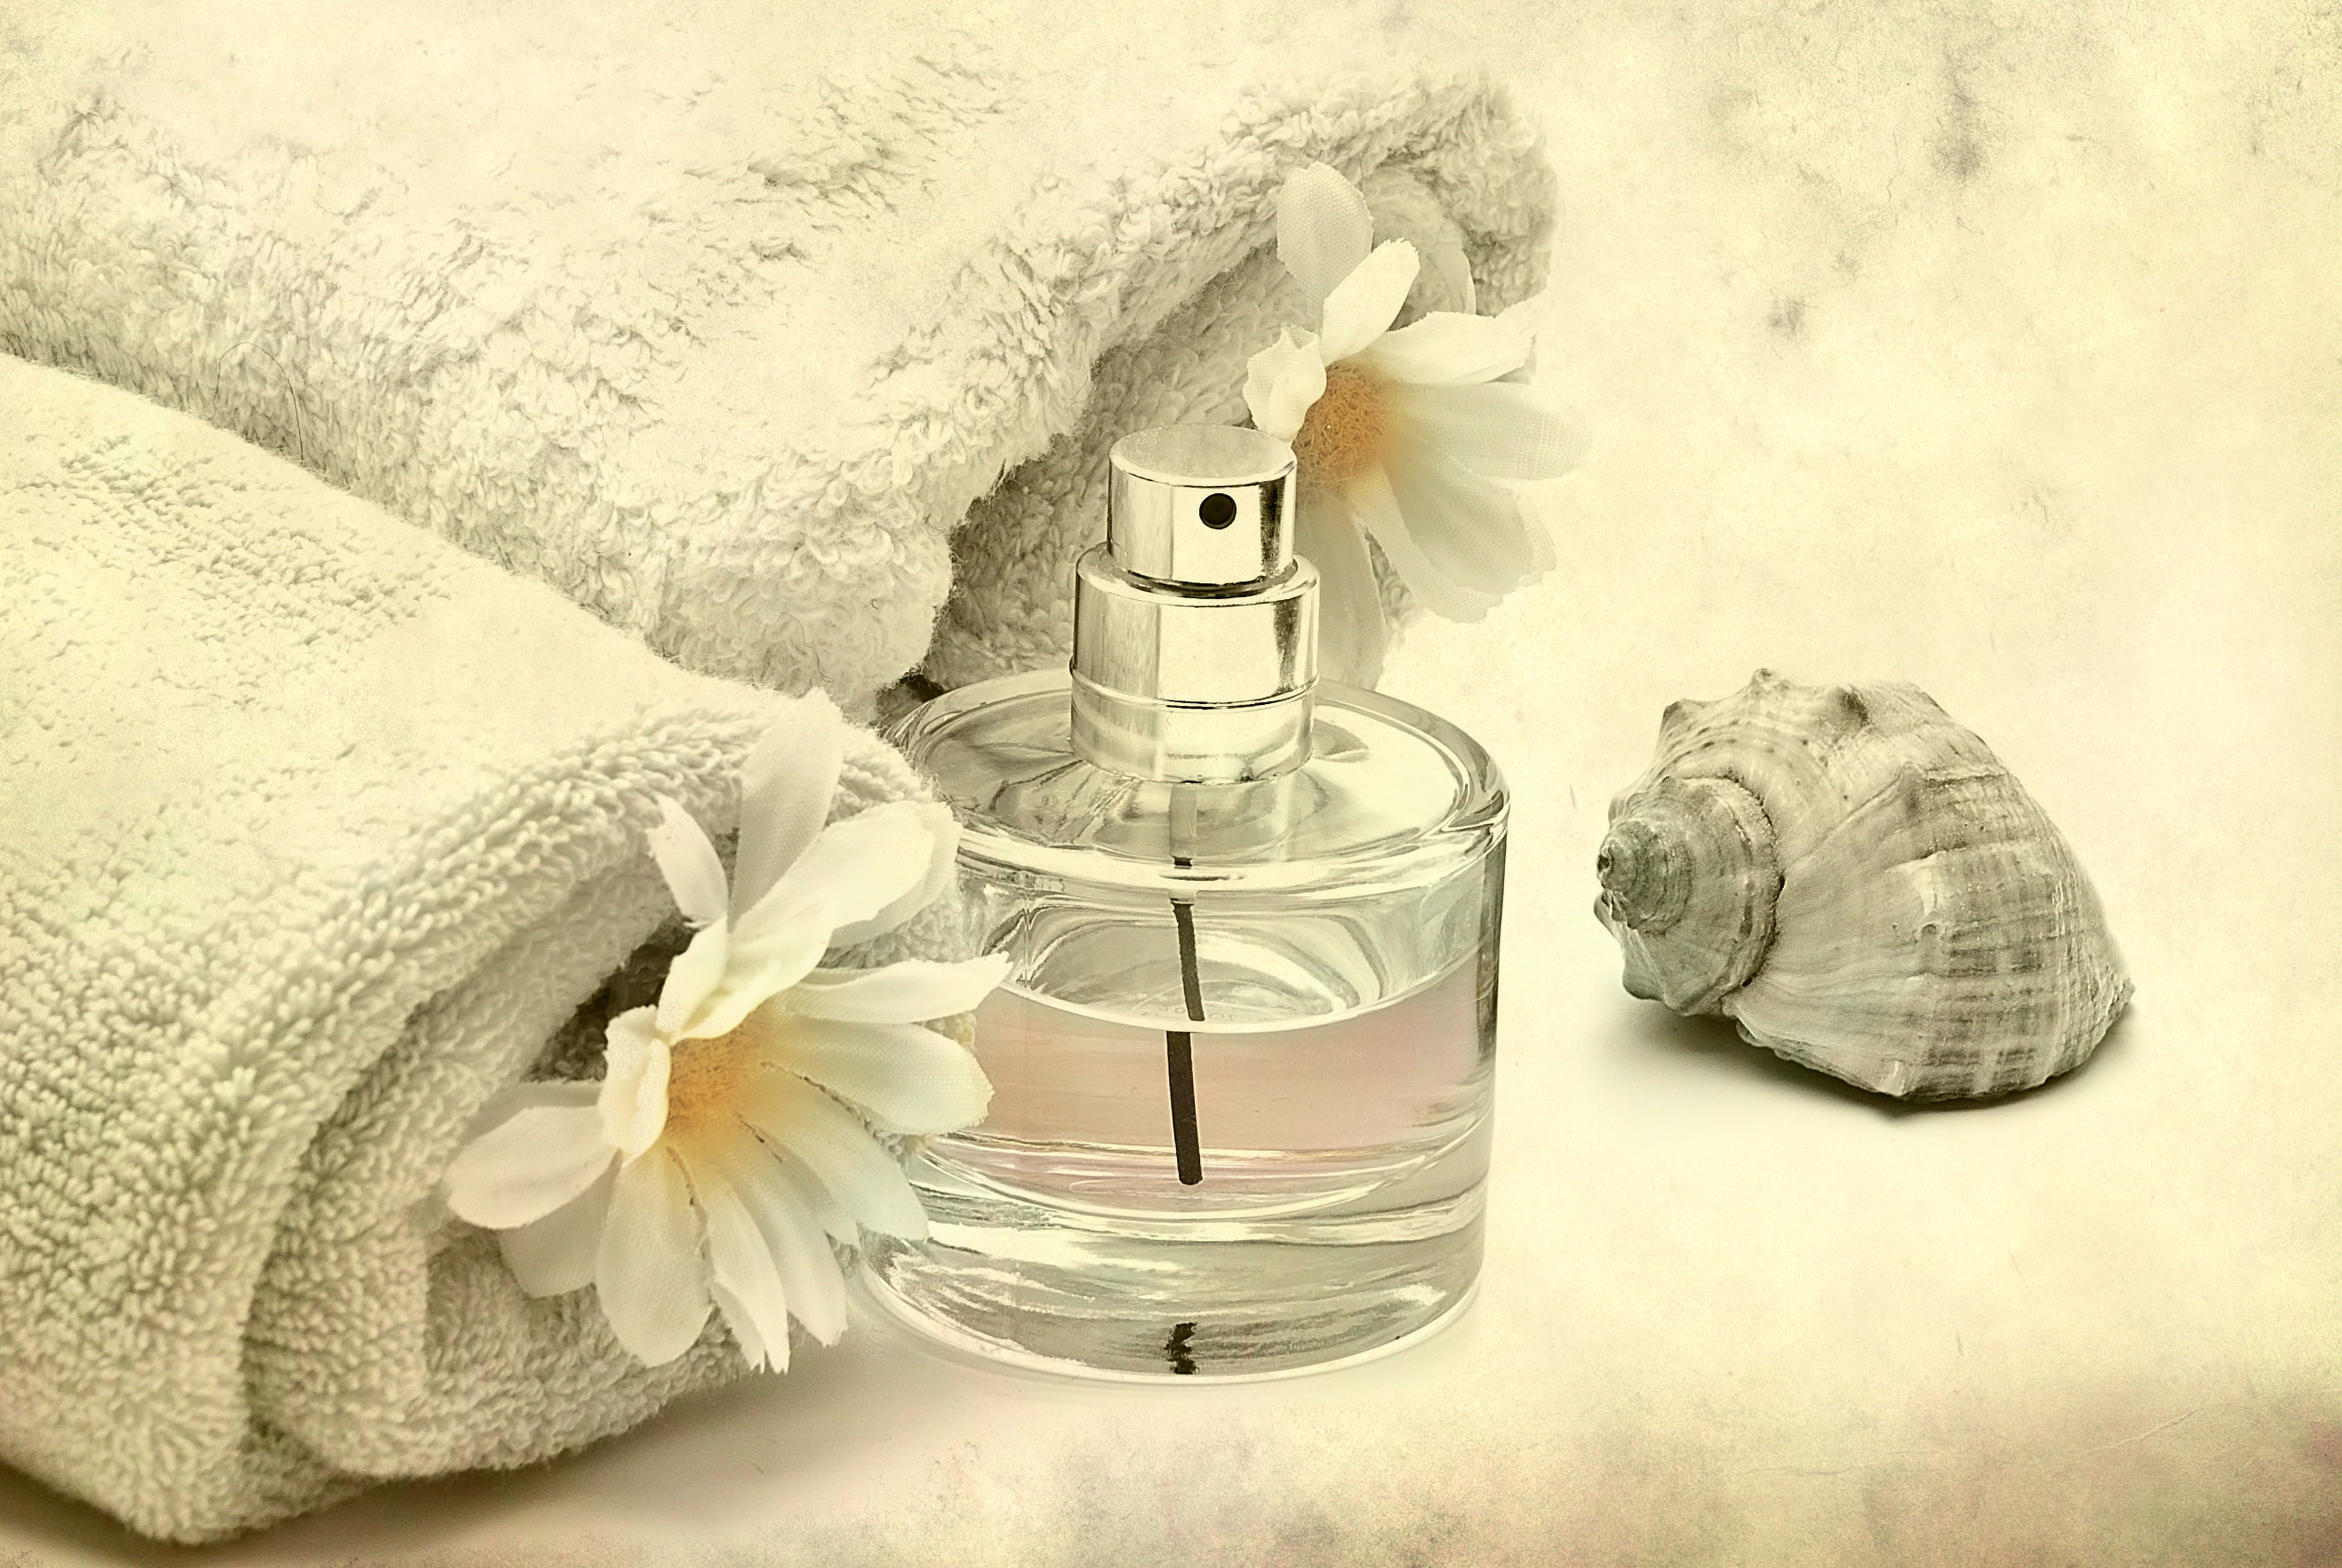 clear glass perfume bottle, water, flowers, towel, relaxation